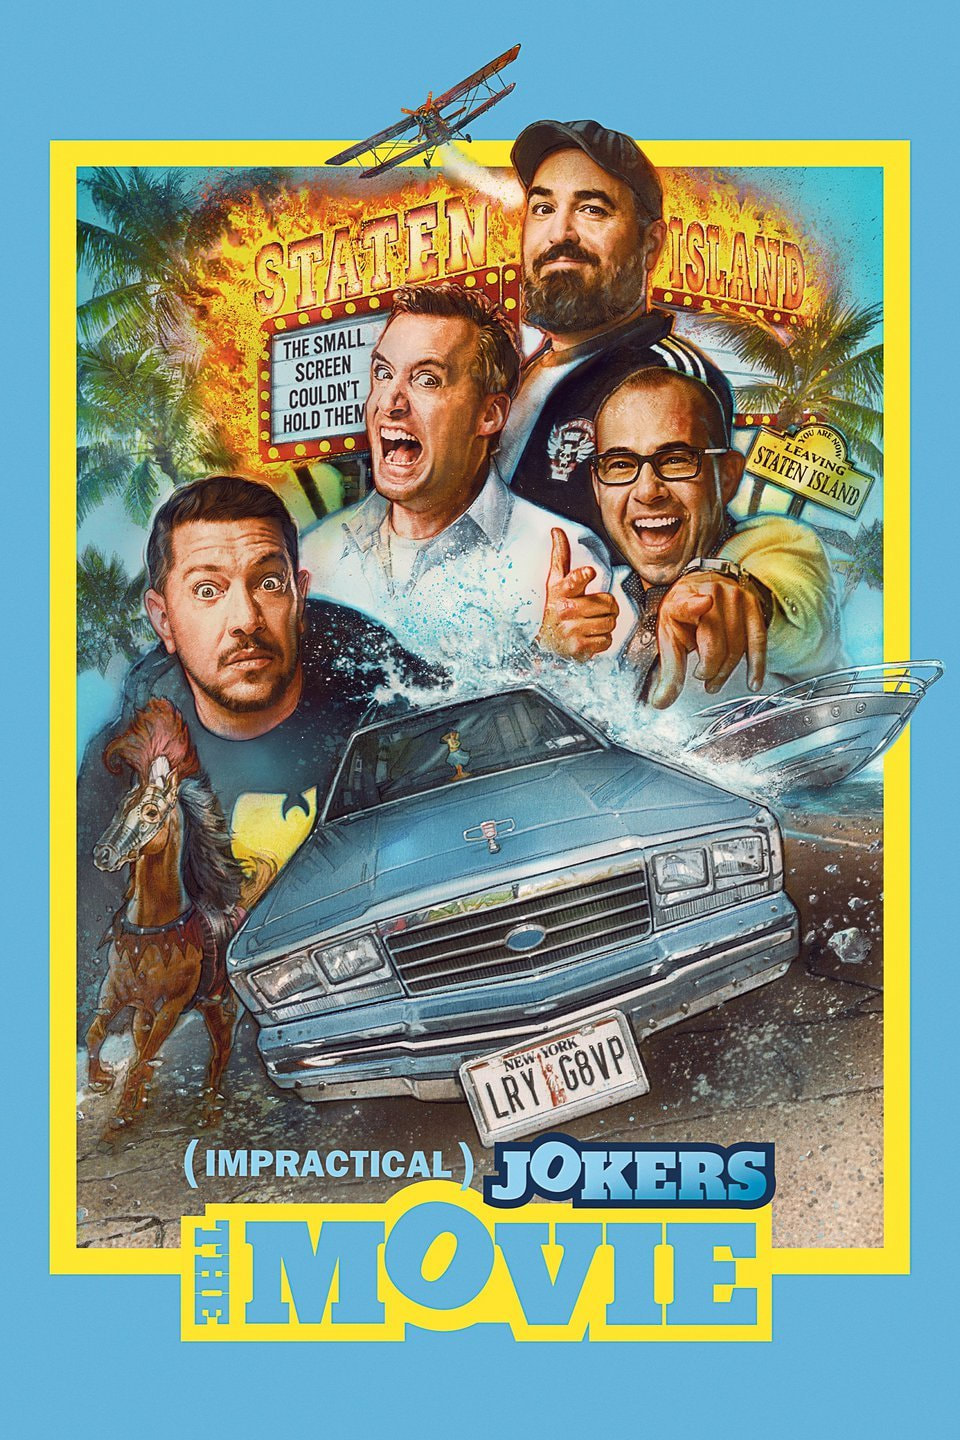 Impractical Jokers: The Movie Review